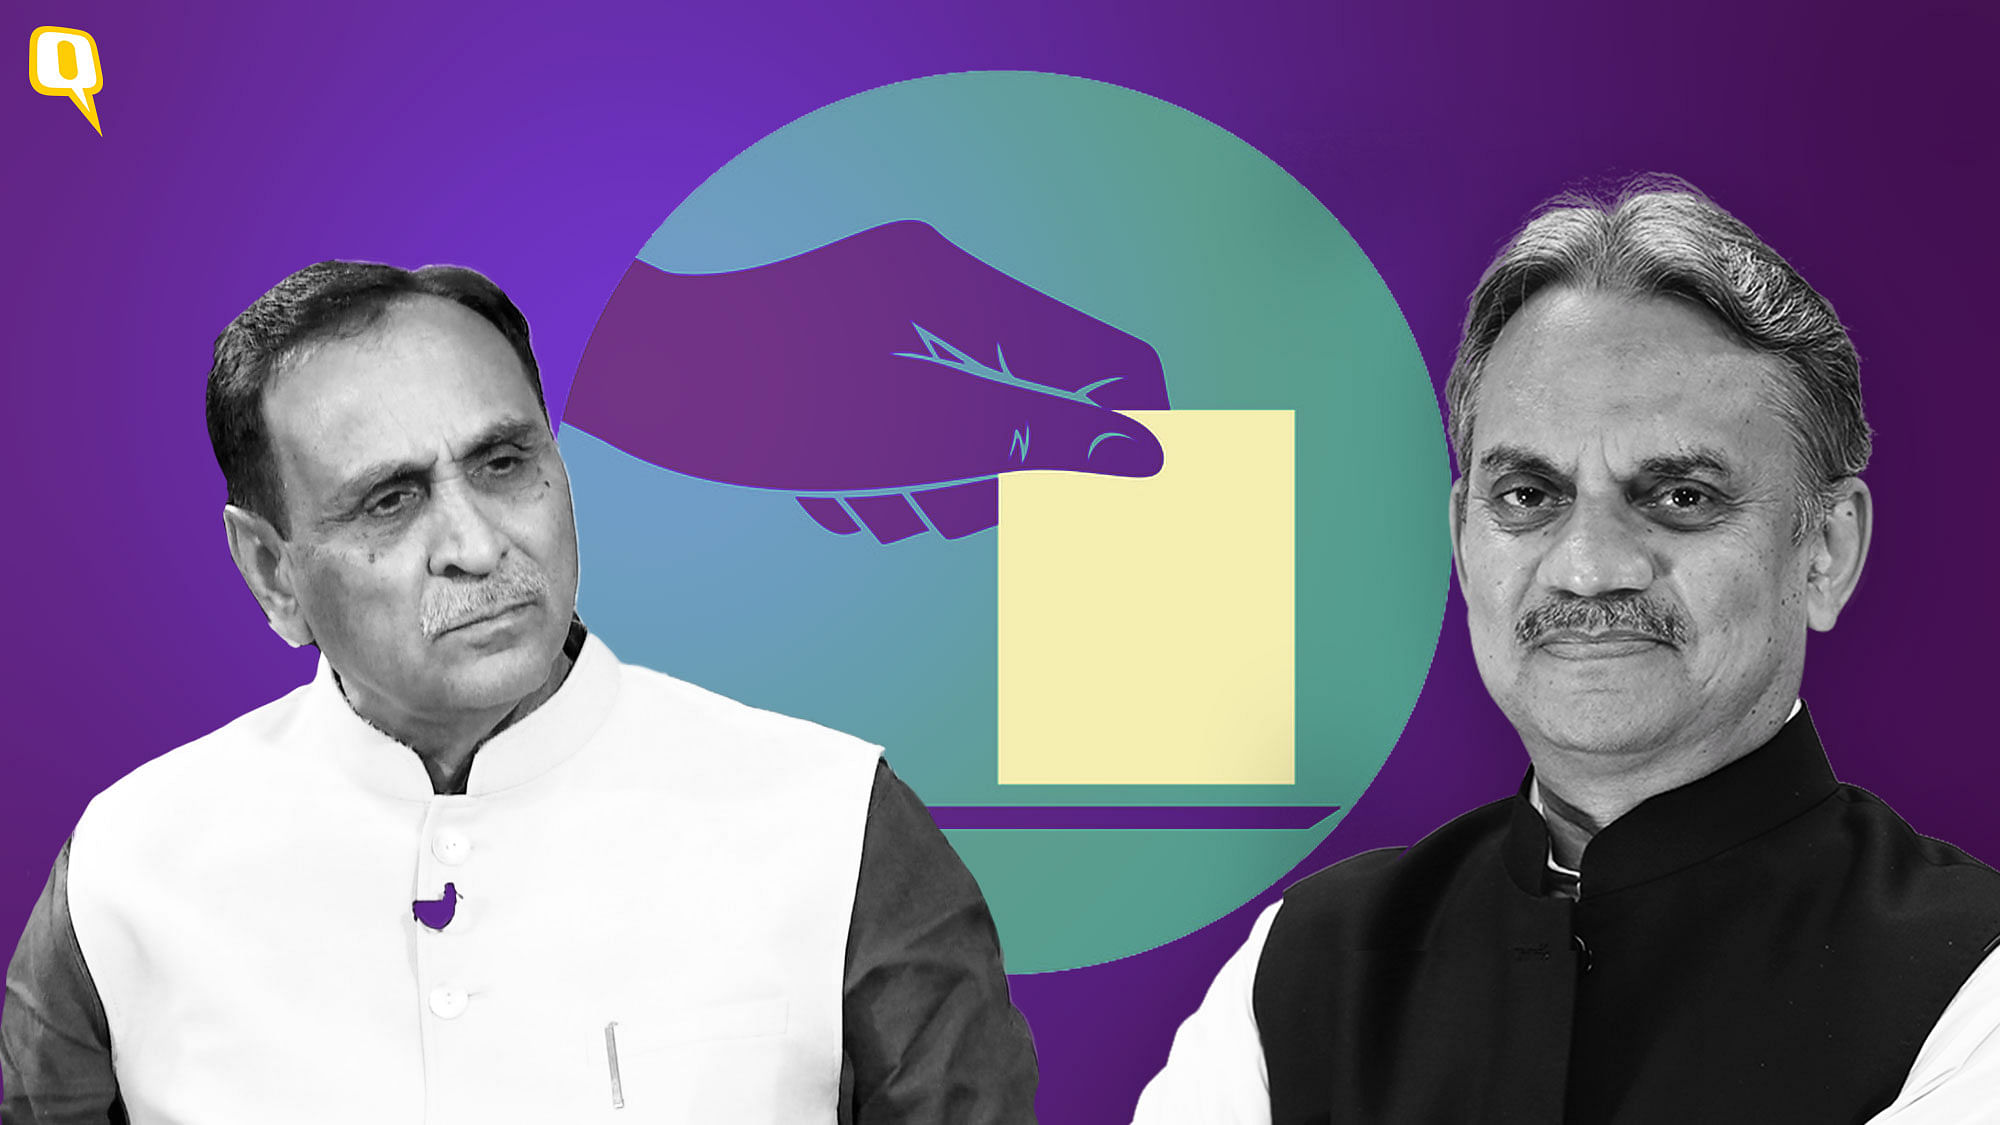 Chief Minister Vijay Rupani is confident of BJP winning more than 150 seats in the Gujarat elections.